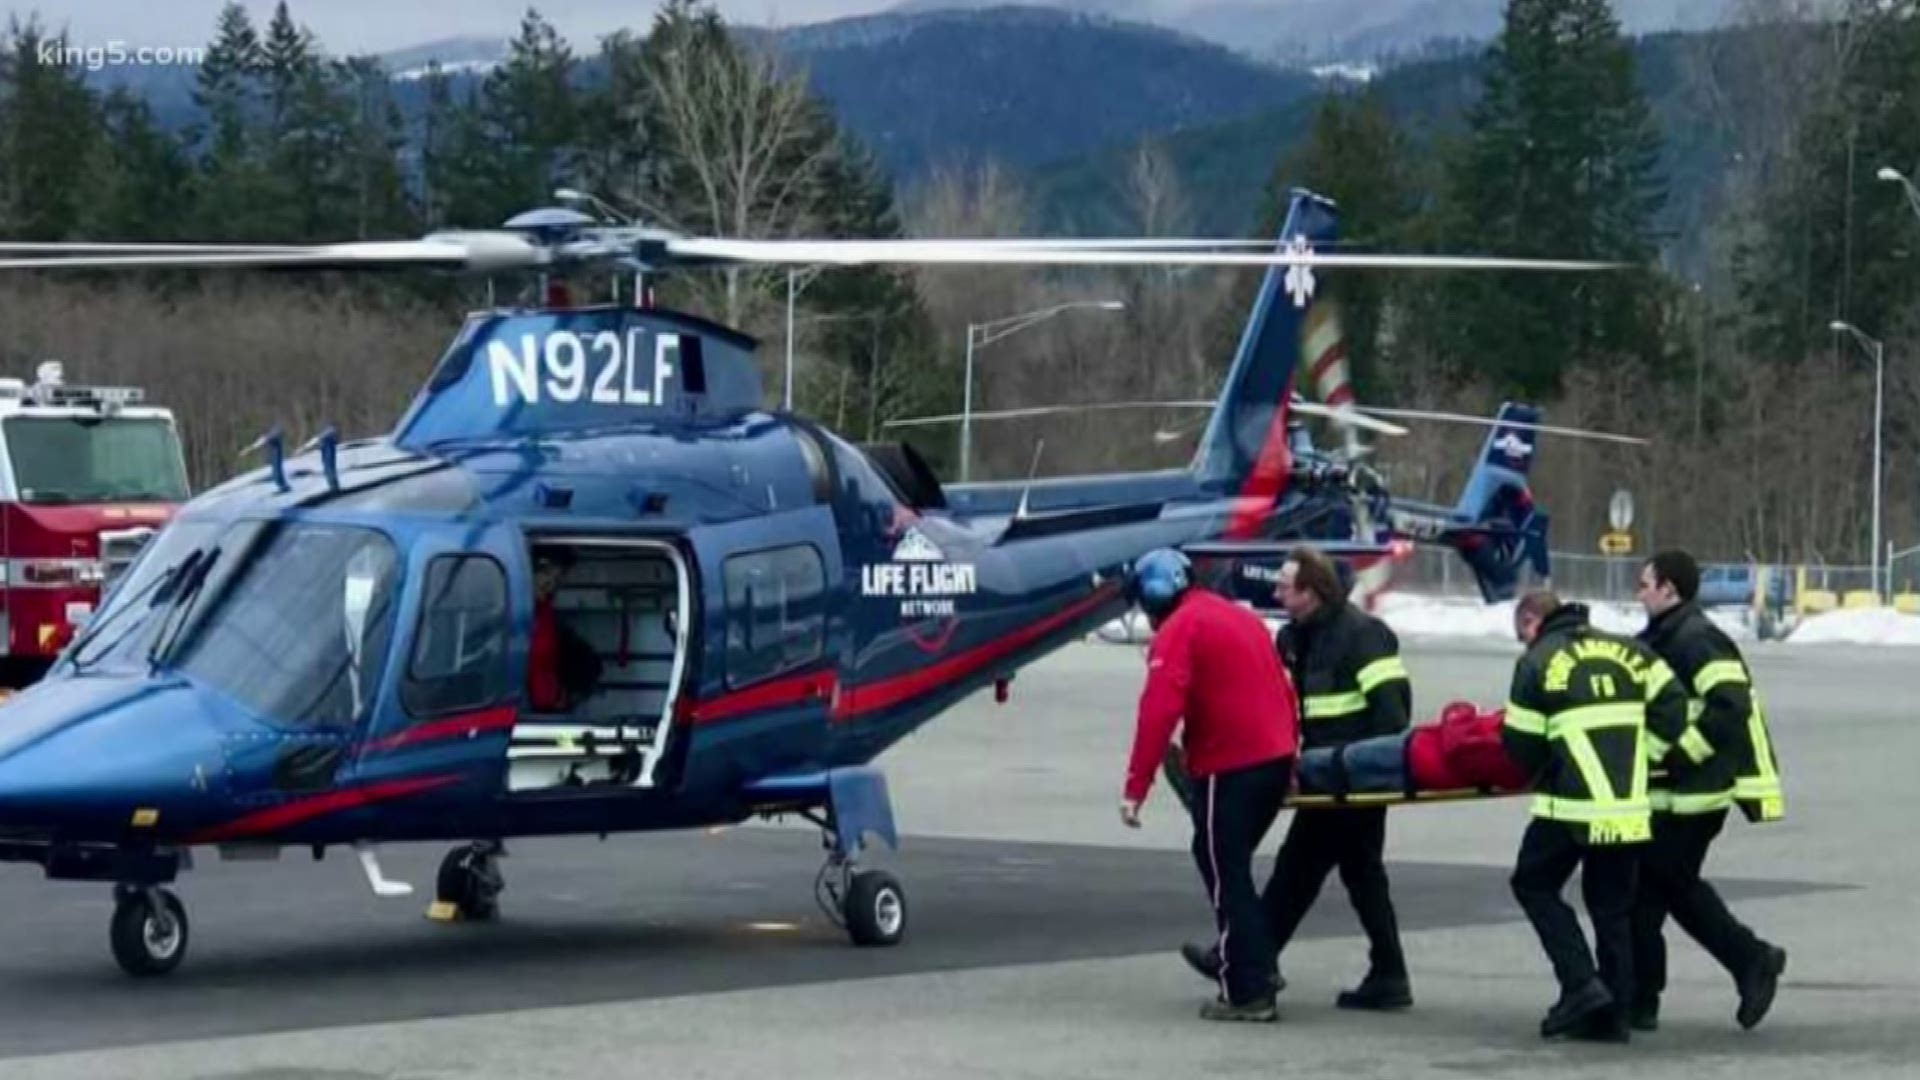 Life flight helicopters cover much of the Northwest, but one region has been off the radar, until now. KING 5's Eric Wilkinson has the story from Port Angeles.